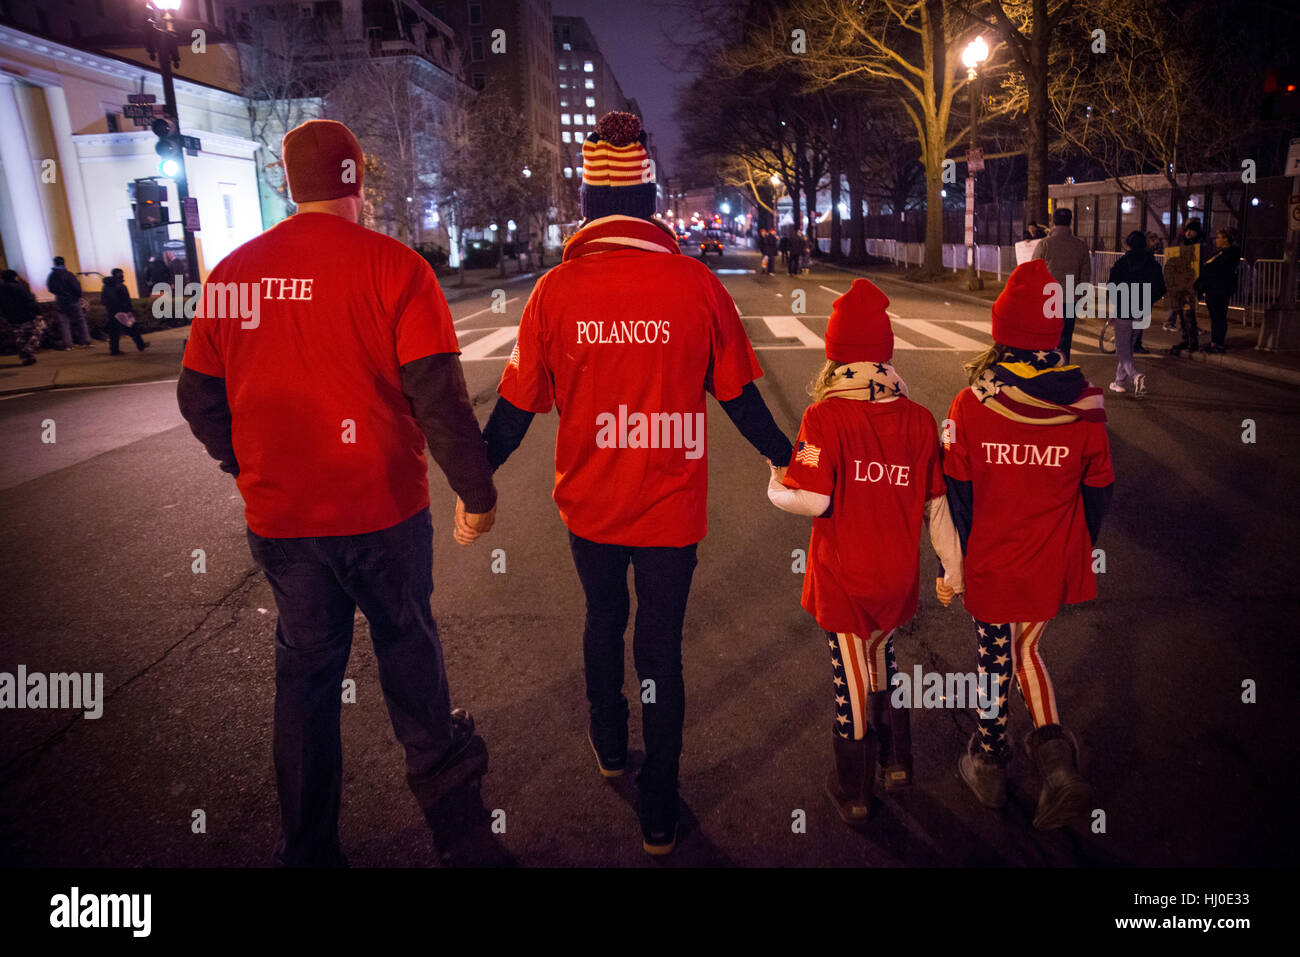 Washington DC, USA. 20th Jan, 2017. Family showing support to Donald Trump walking on a street by the White House. Trump becomes 45th President of the United States. Credit: Yuriy Zahvoyskyy/Alamy Live News Stock Photo